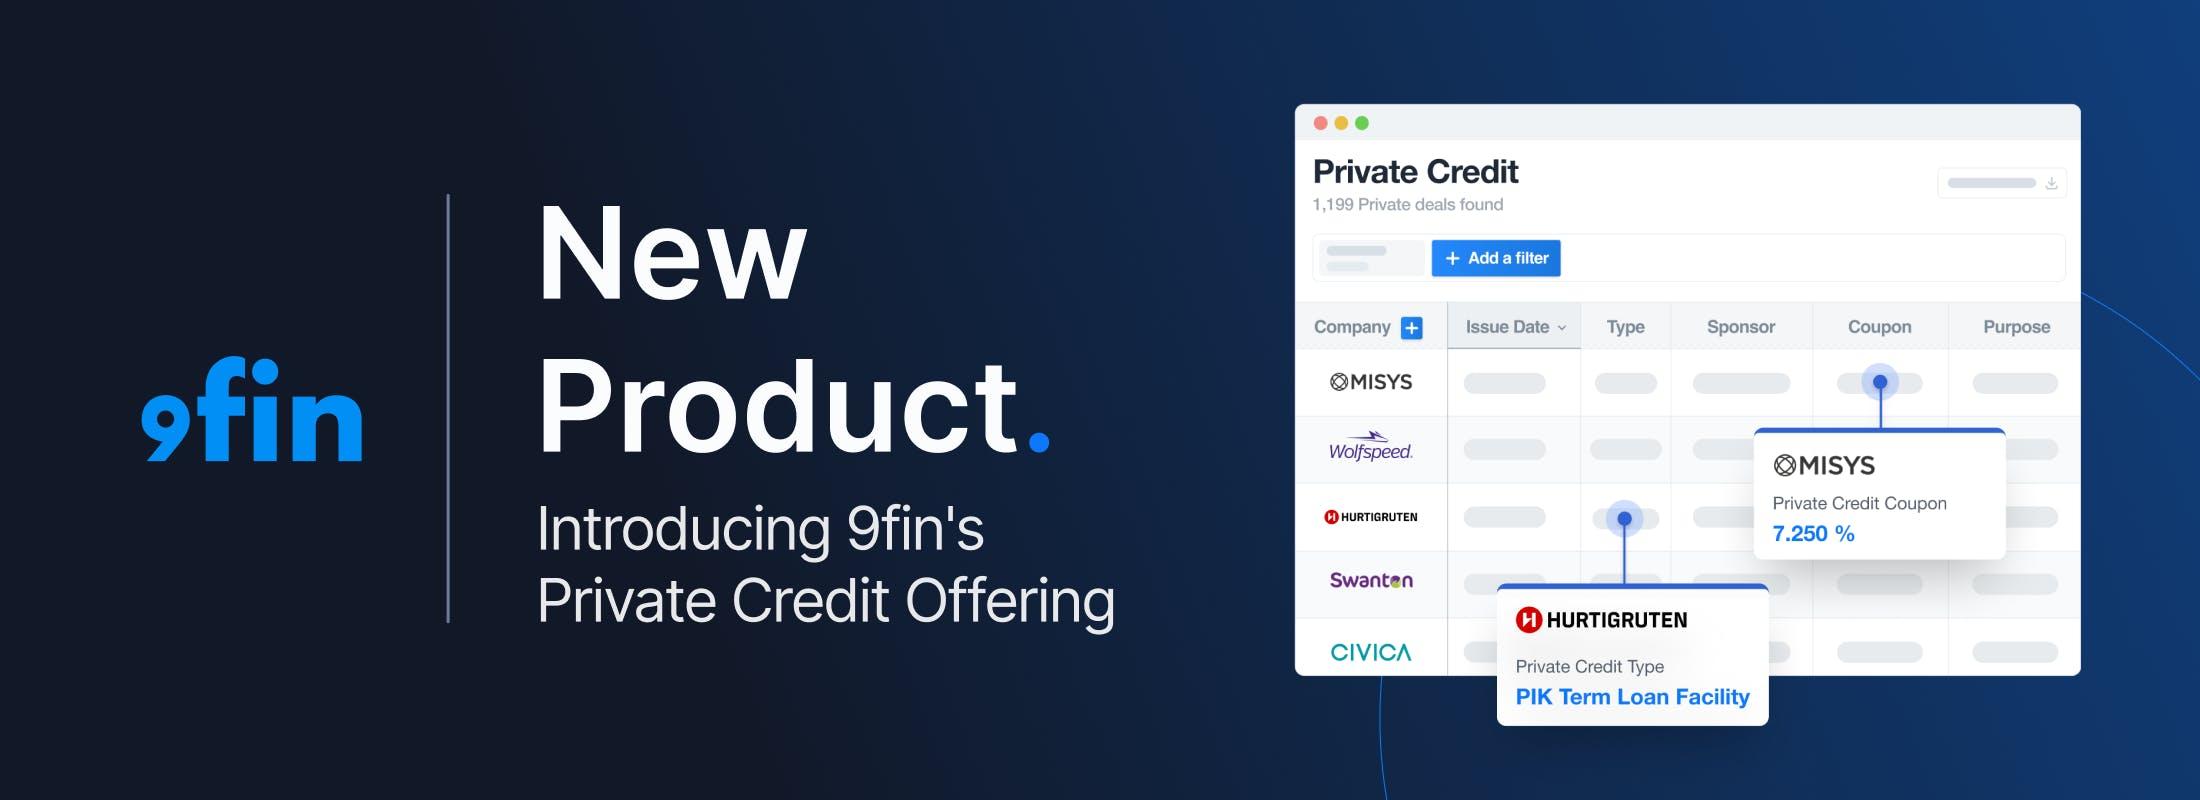 Introducing 9fin's Private Credit Offering